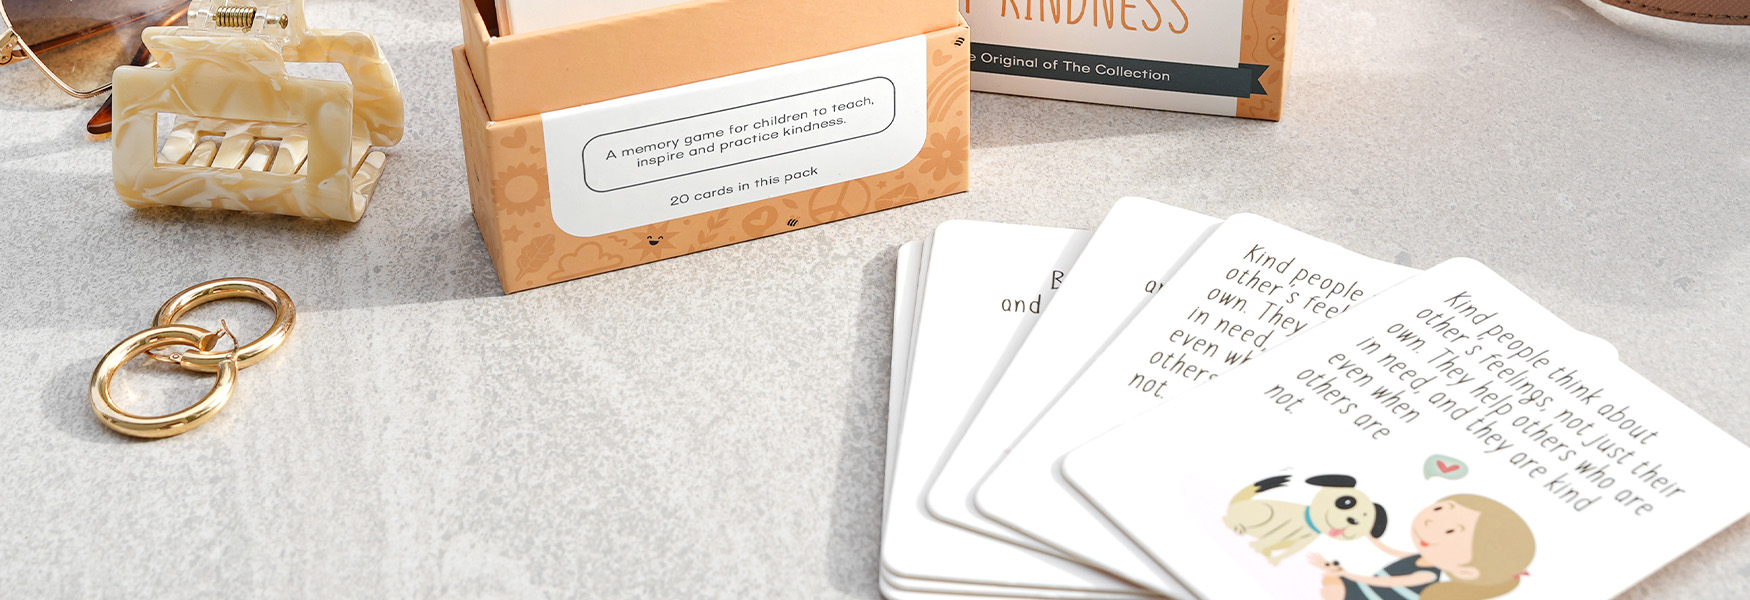 Little Box of Kindness Memory Game cards spread